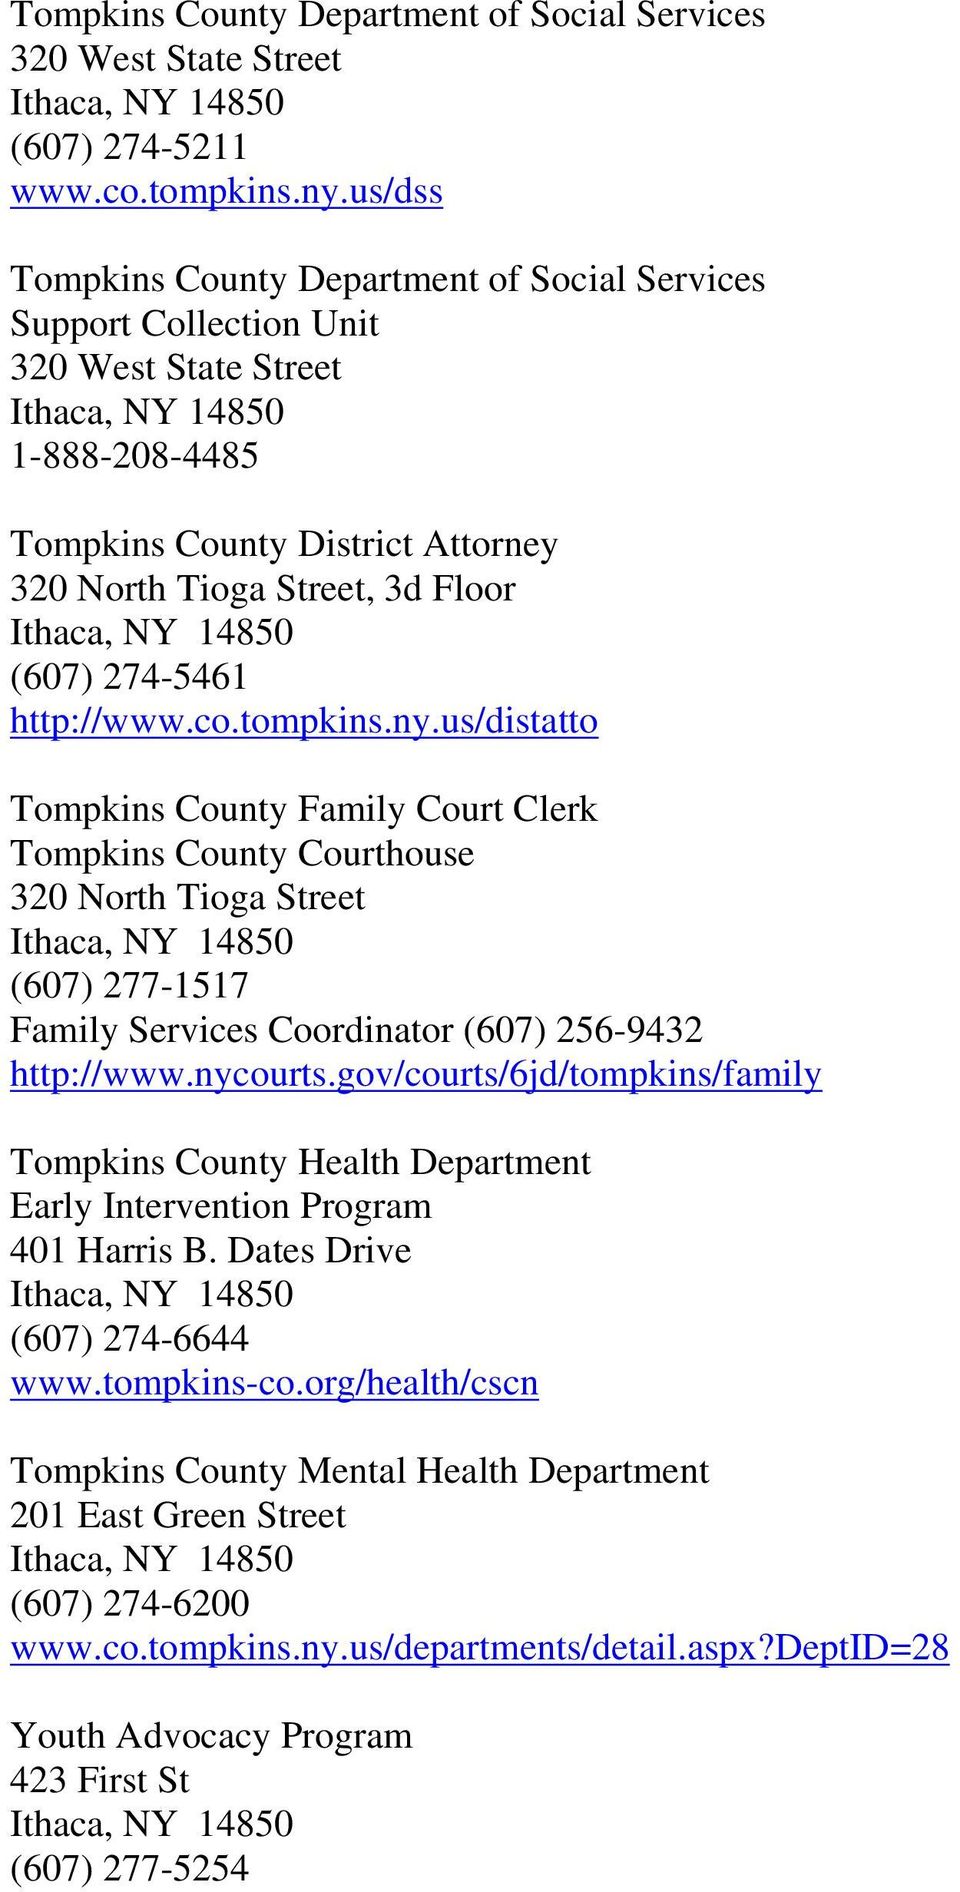 http://www.co.tompkins.ny.us/distatto Tompkins County Family Court Clerk Tompkins County Courthouse 320 North Tioga Street (607) 277-1517 Family Services Coordinator (607) 256-9432 http://www.